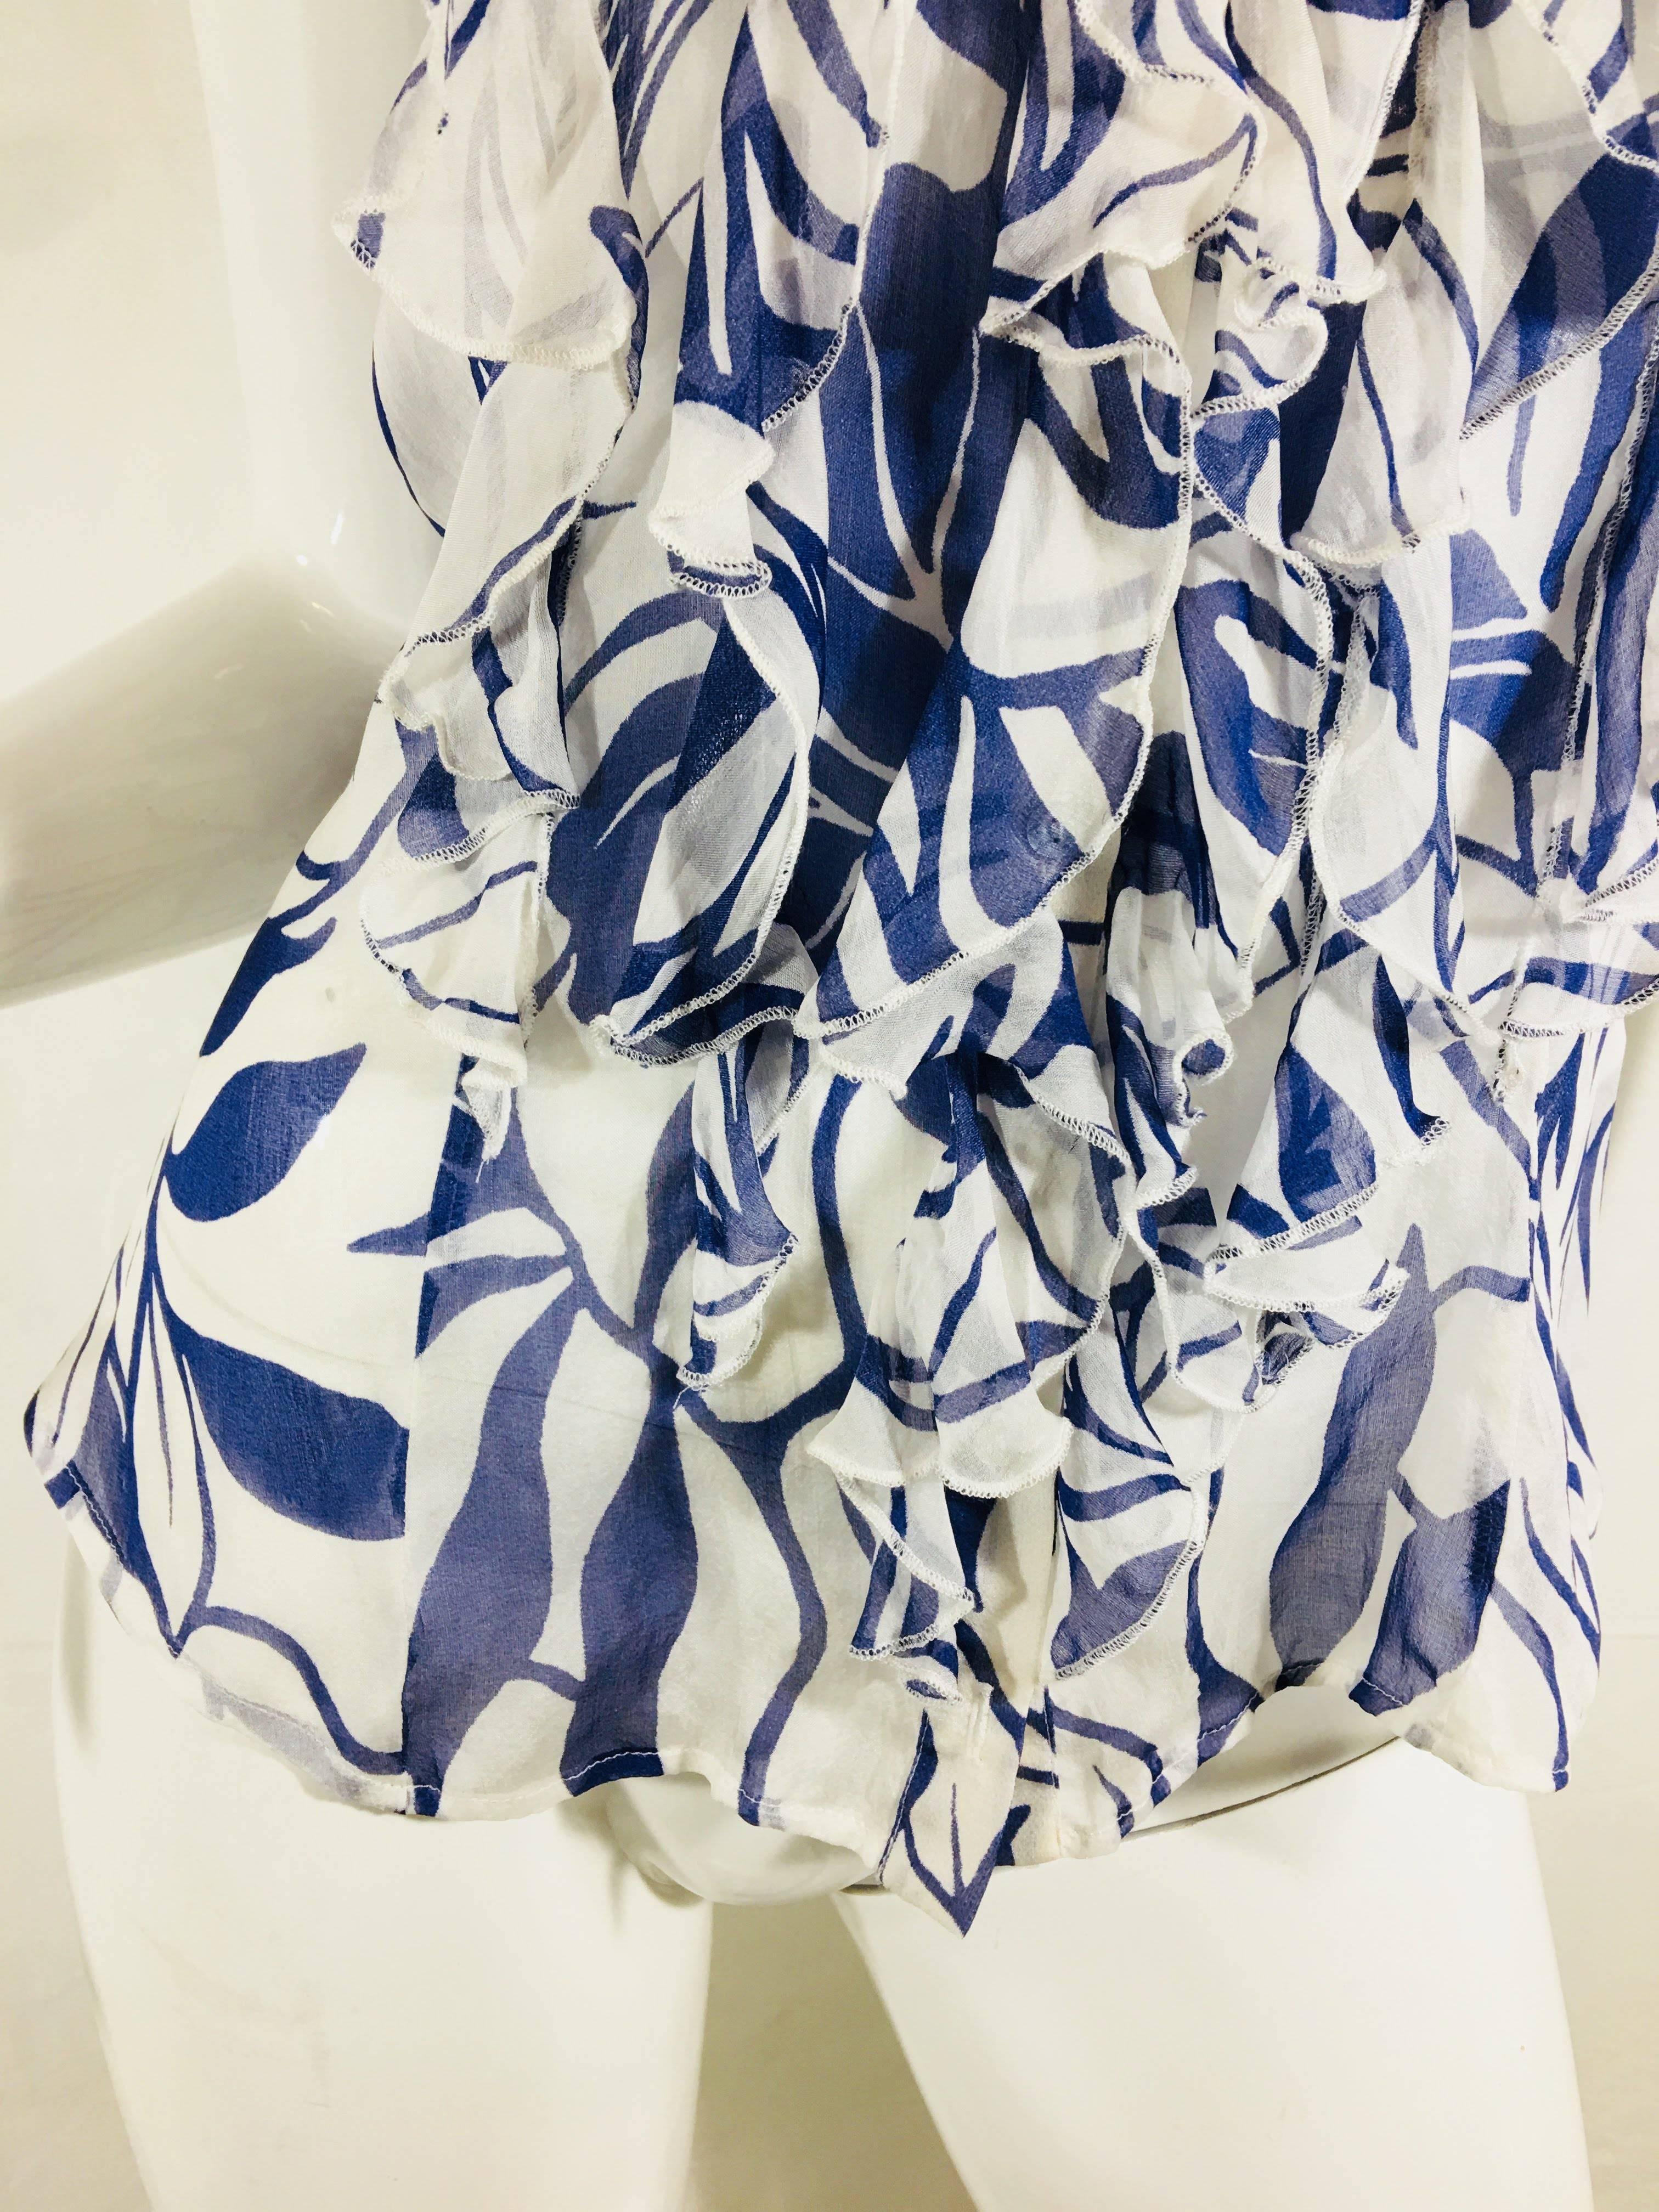 Anne Fontaine Sleeveless Sheer Blouse with Ruffle Detail, Blue and White Printed Silk.